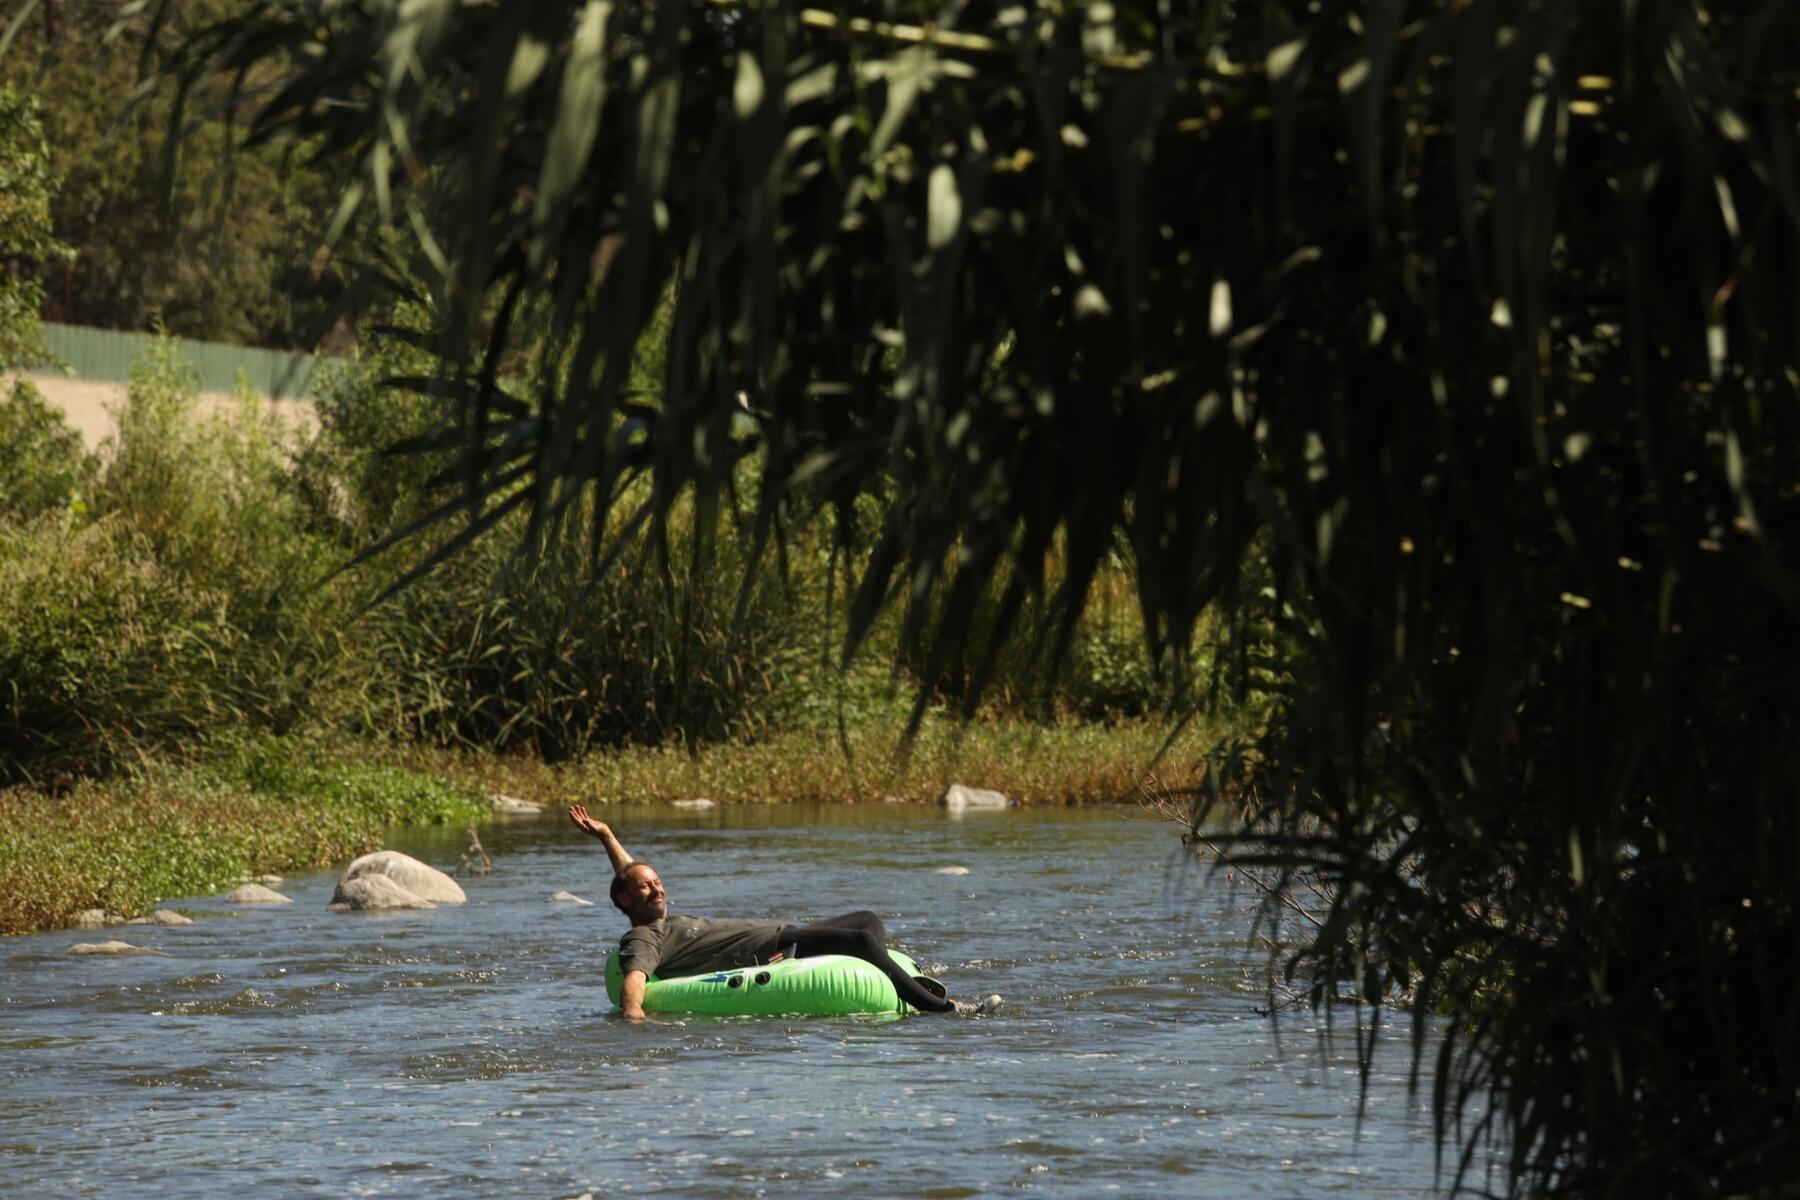 A man floats on a lime-green raft on the L.A. River 